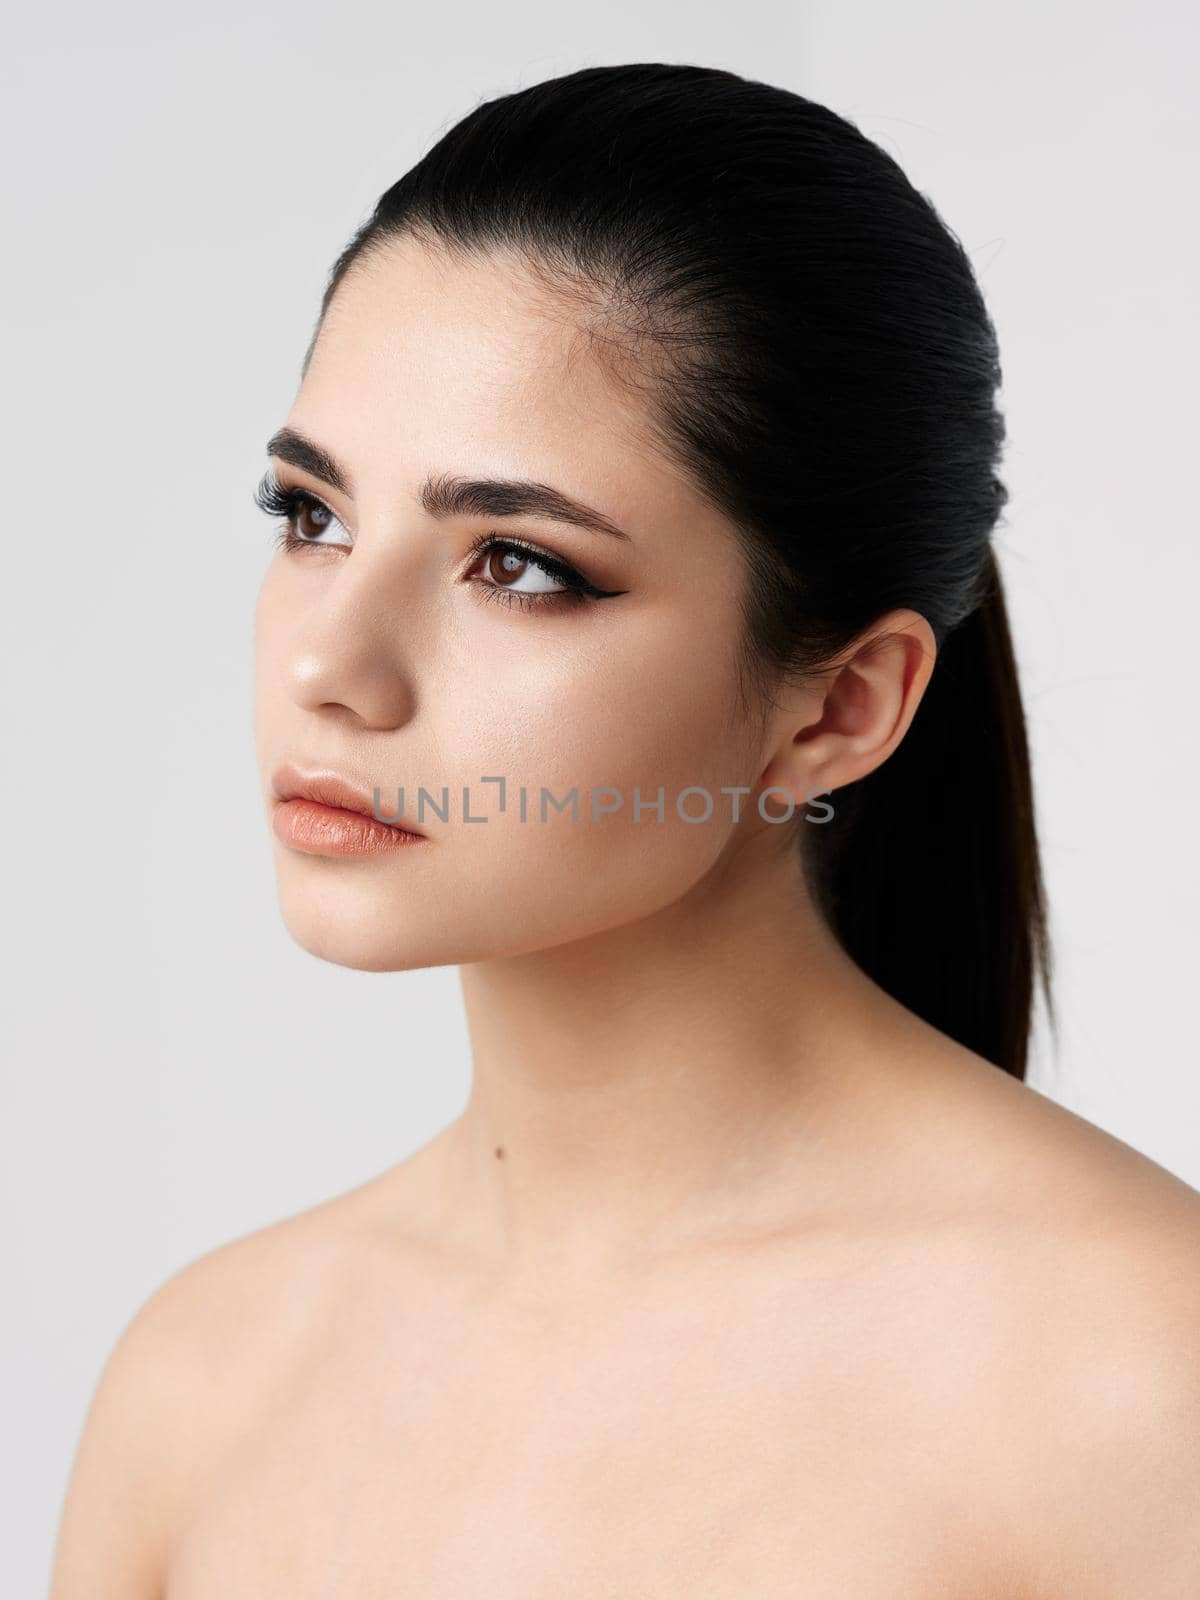 woman looking to the side naked shoulders makeup skin care. High quality photo